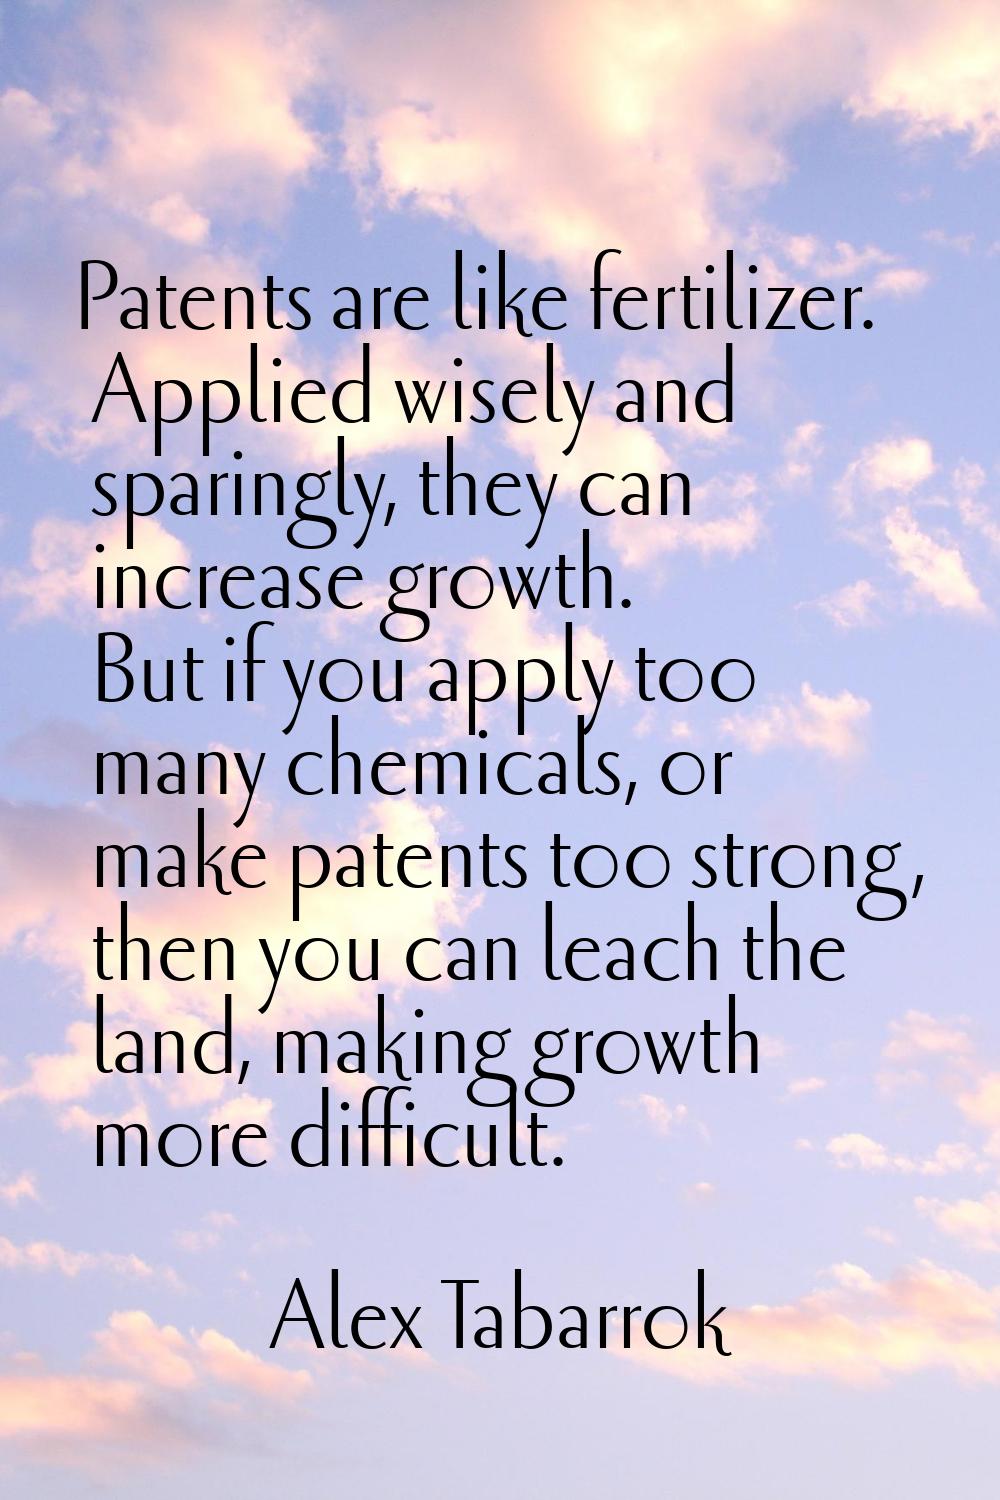 Patents are like fertilizer. Applied wisely and sparingly, they can increase growth. But if you app